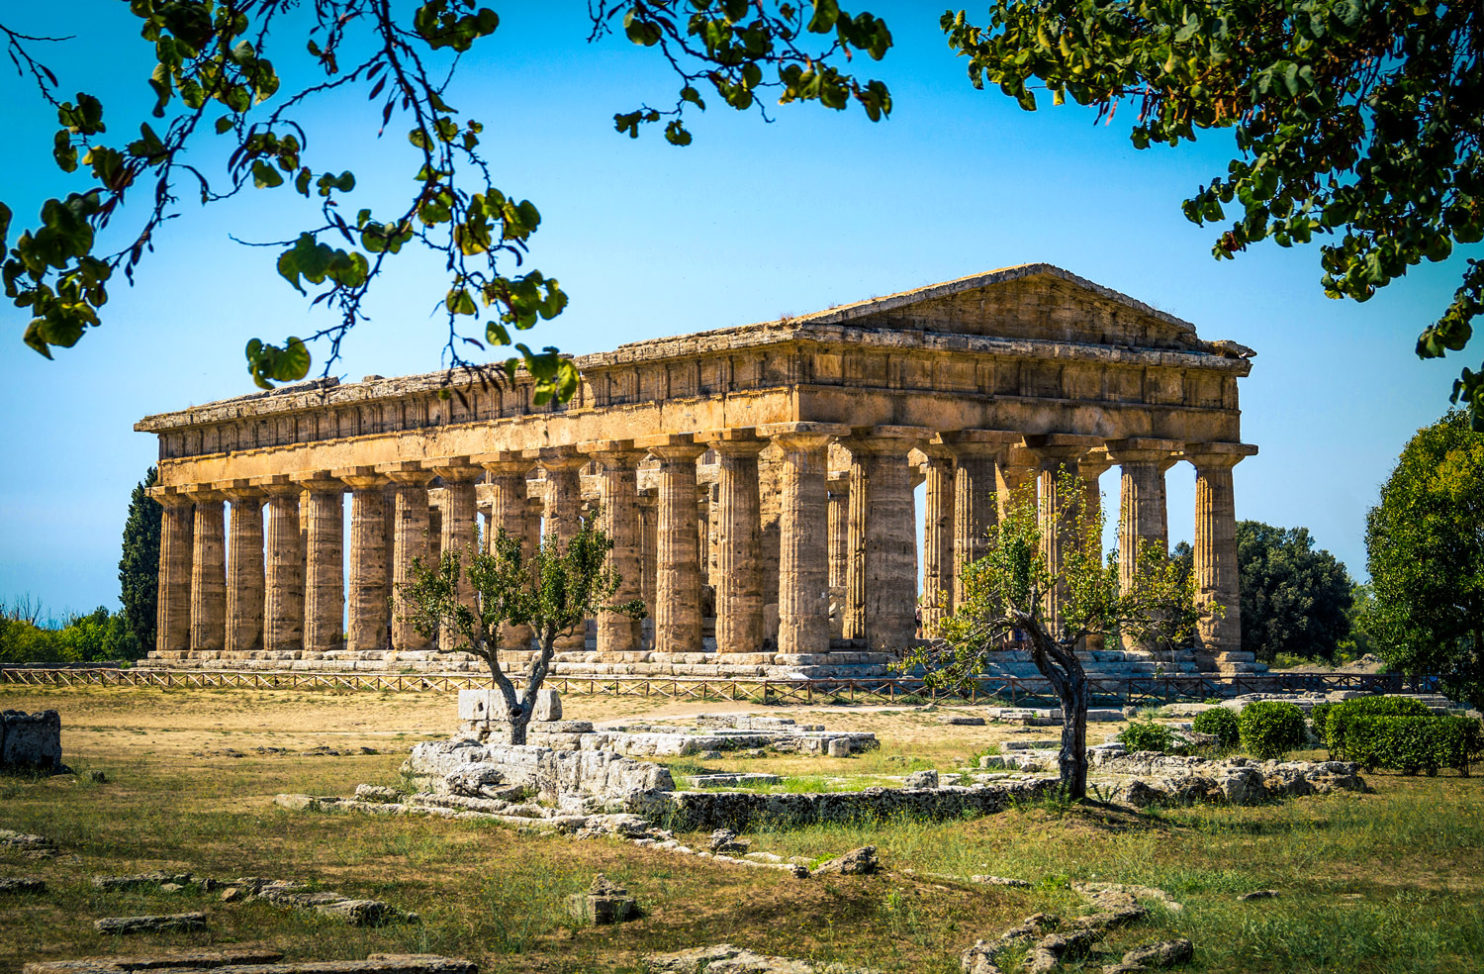 Classical greek temple at ruins of ancient city Paestum, Italy